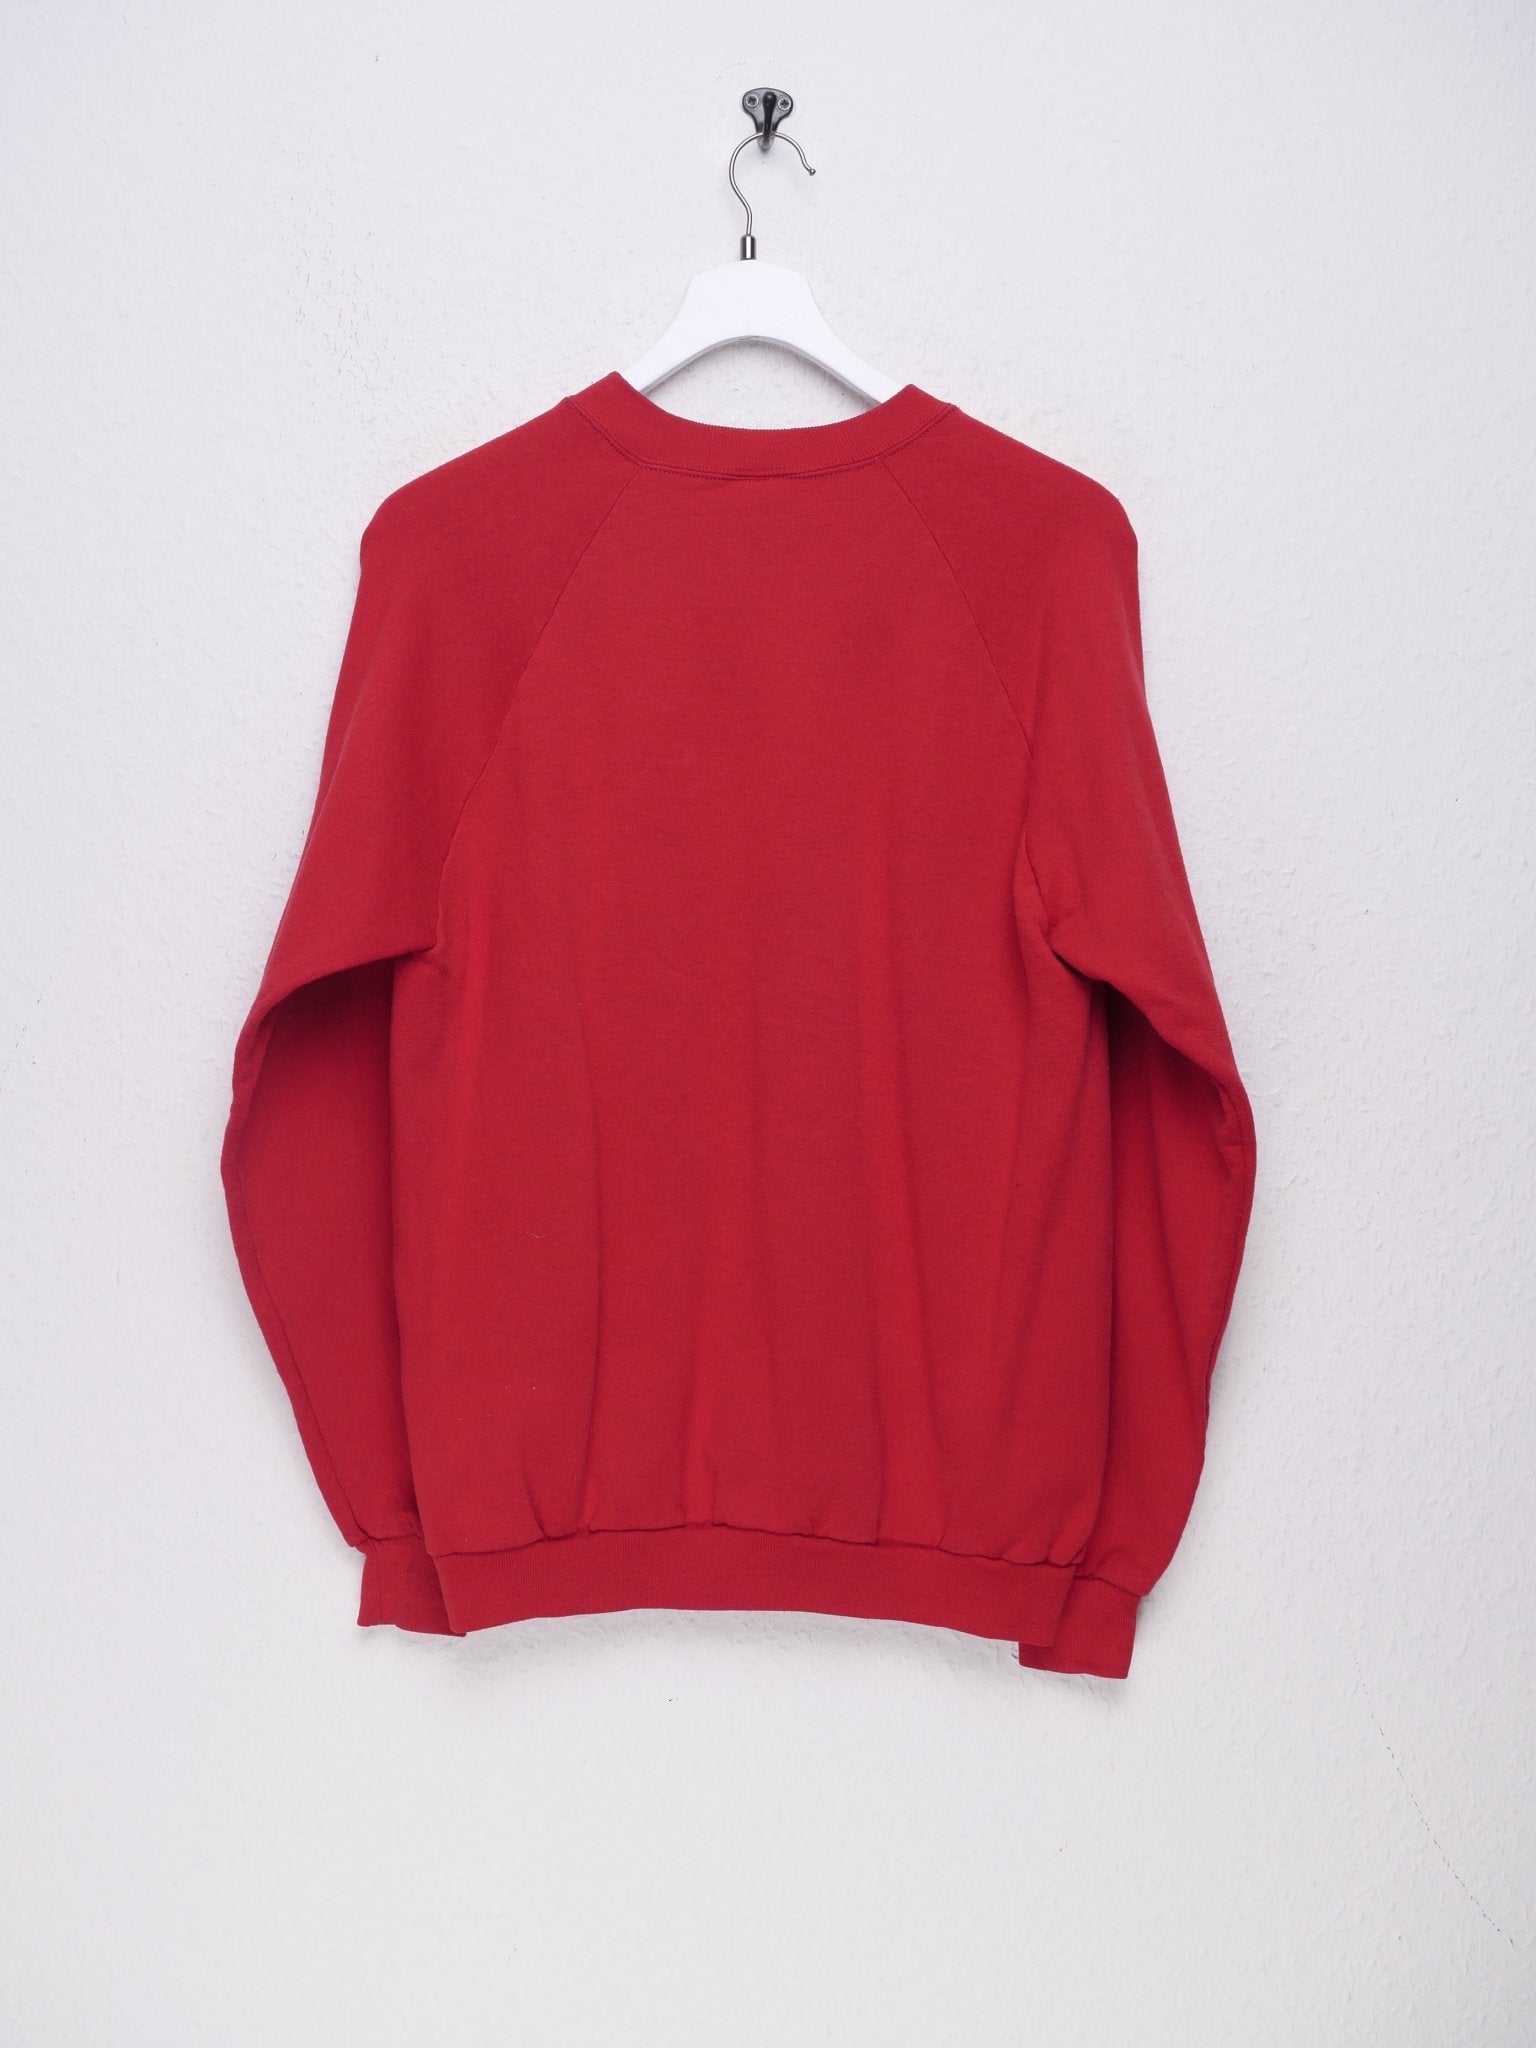 'Young's Jersey Dairy' printed Spellout red Sweater - Peeces